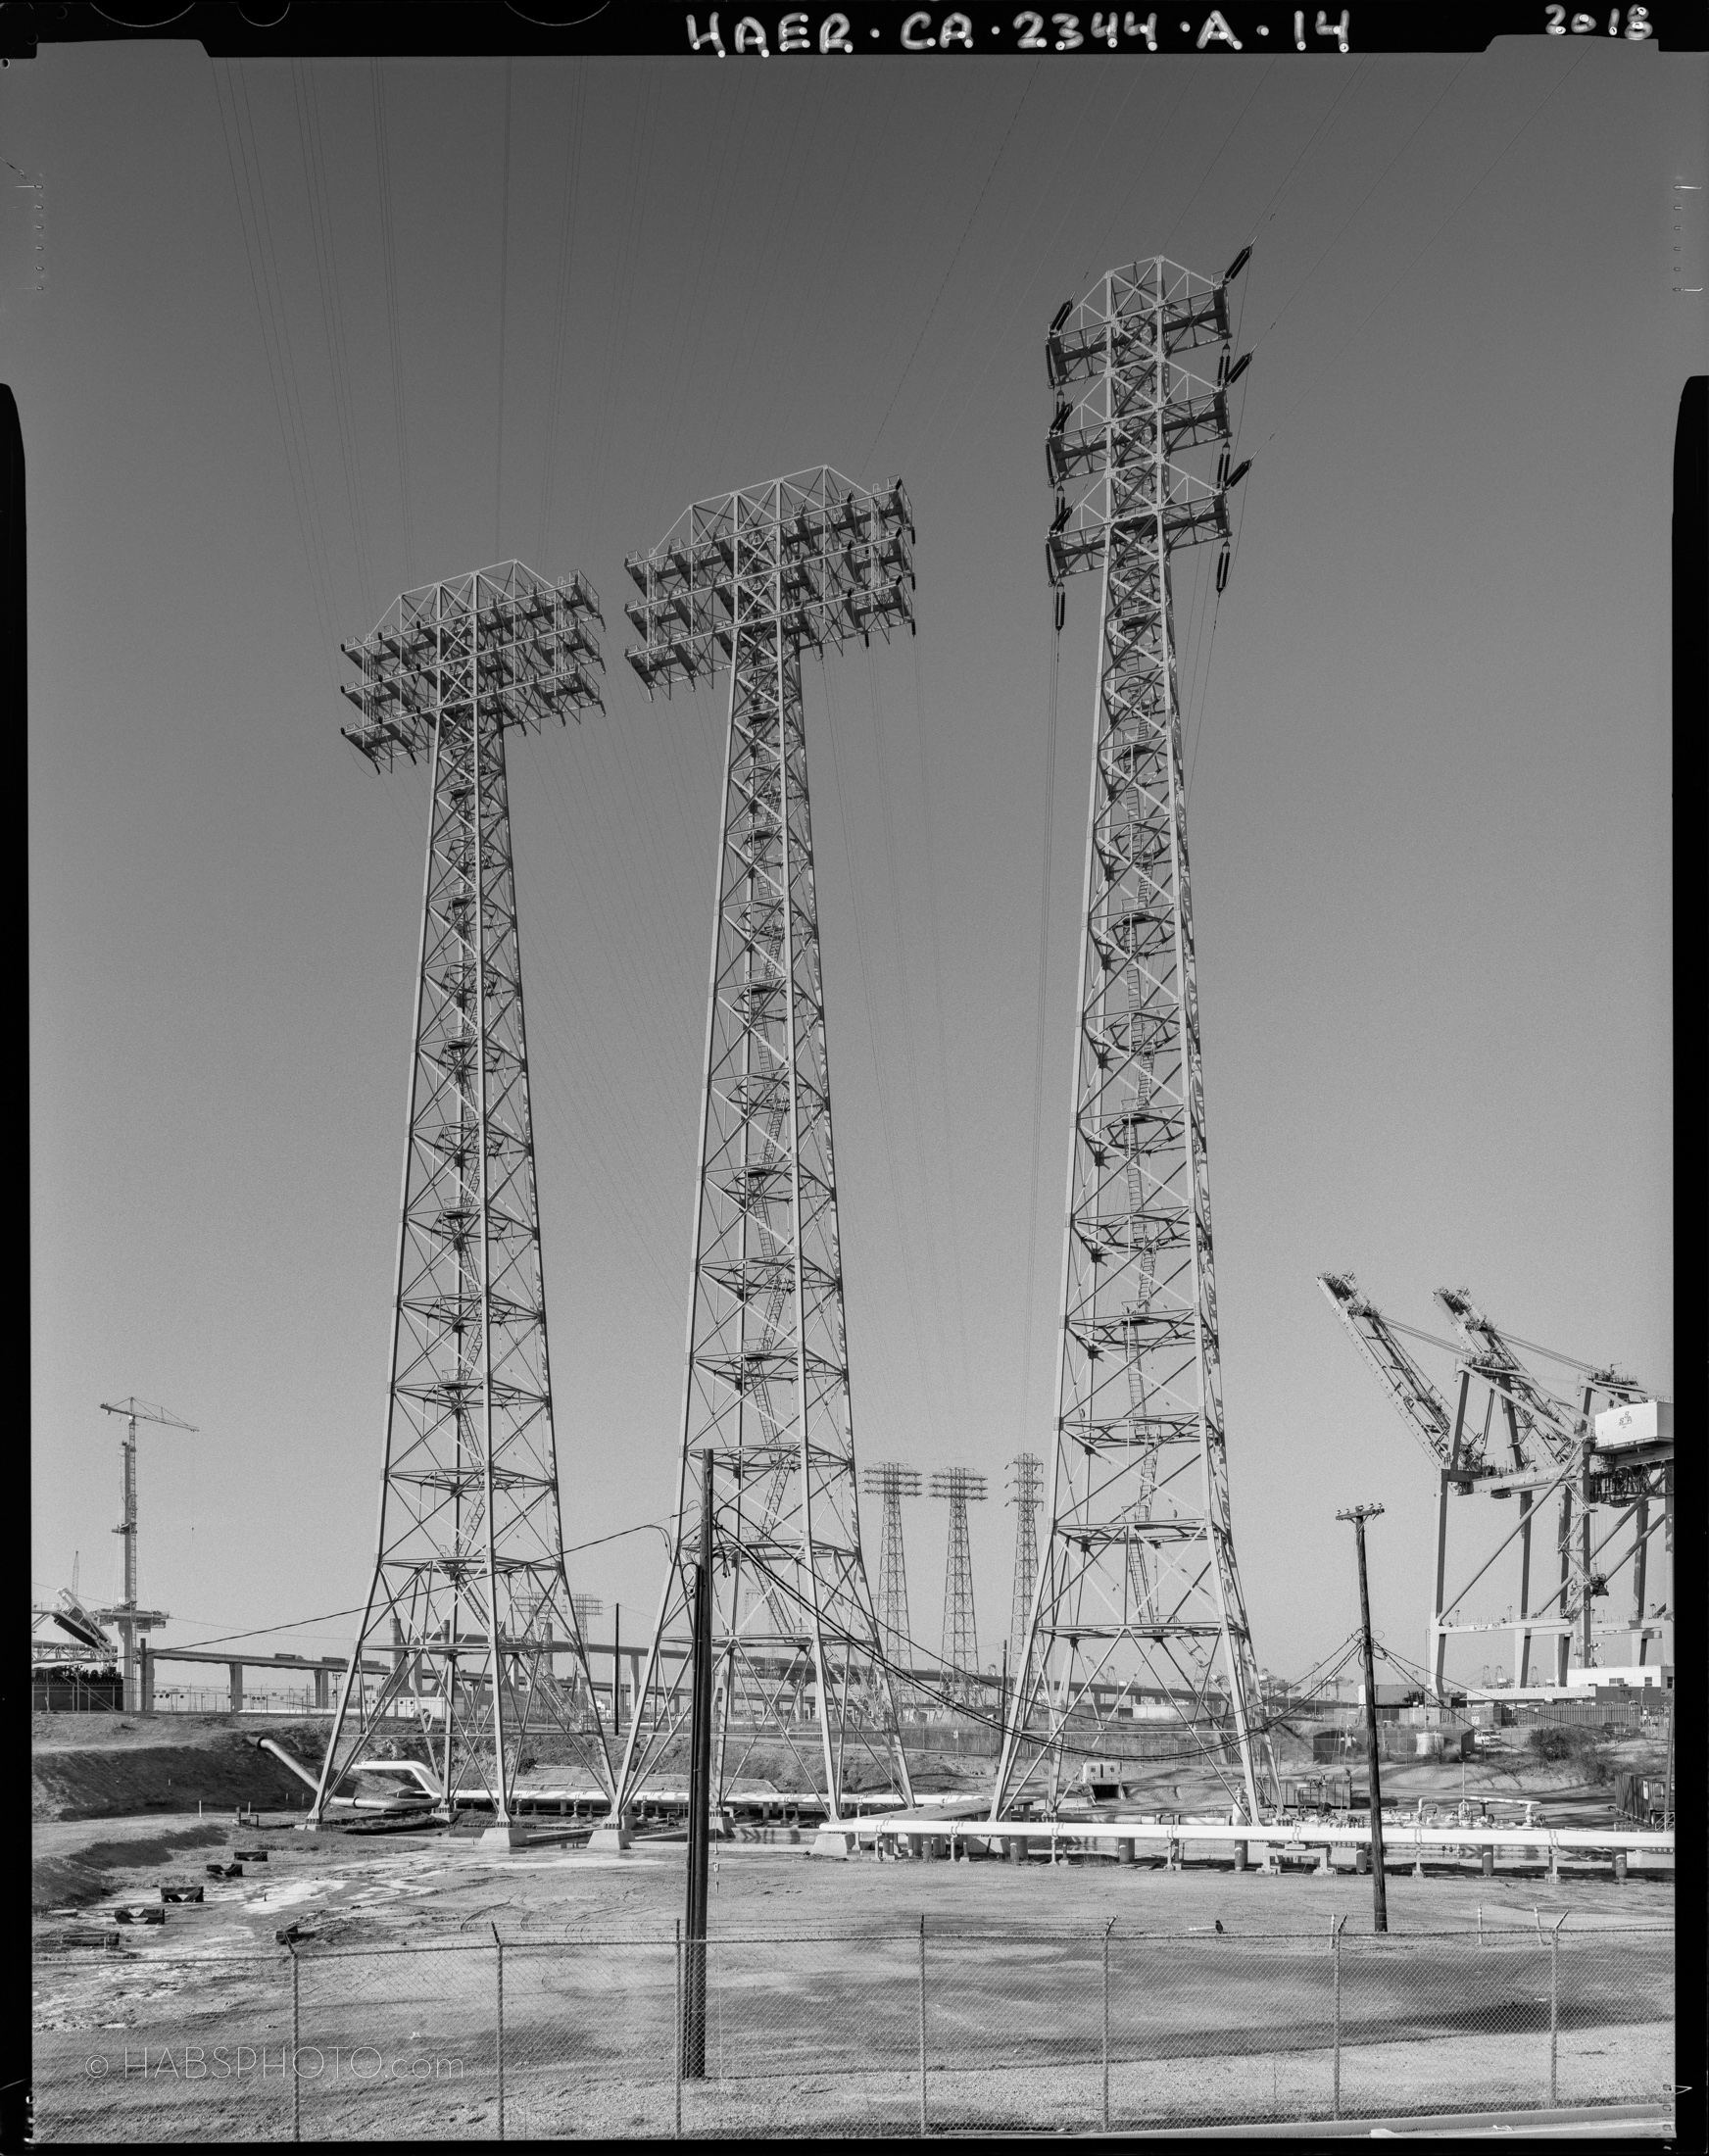 HAER Photograph of Transmission Towers in Long Beach 